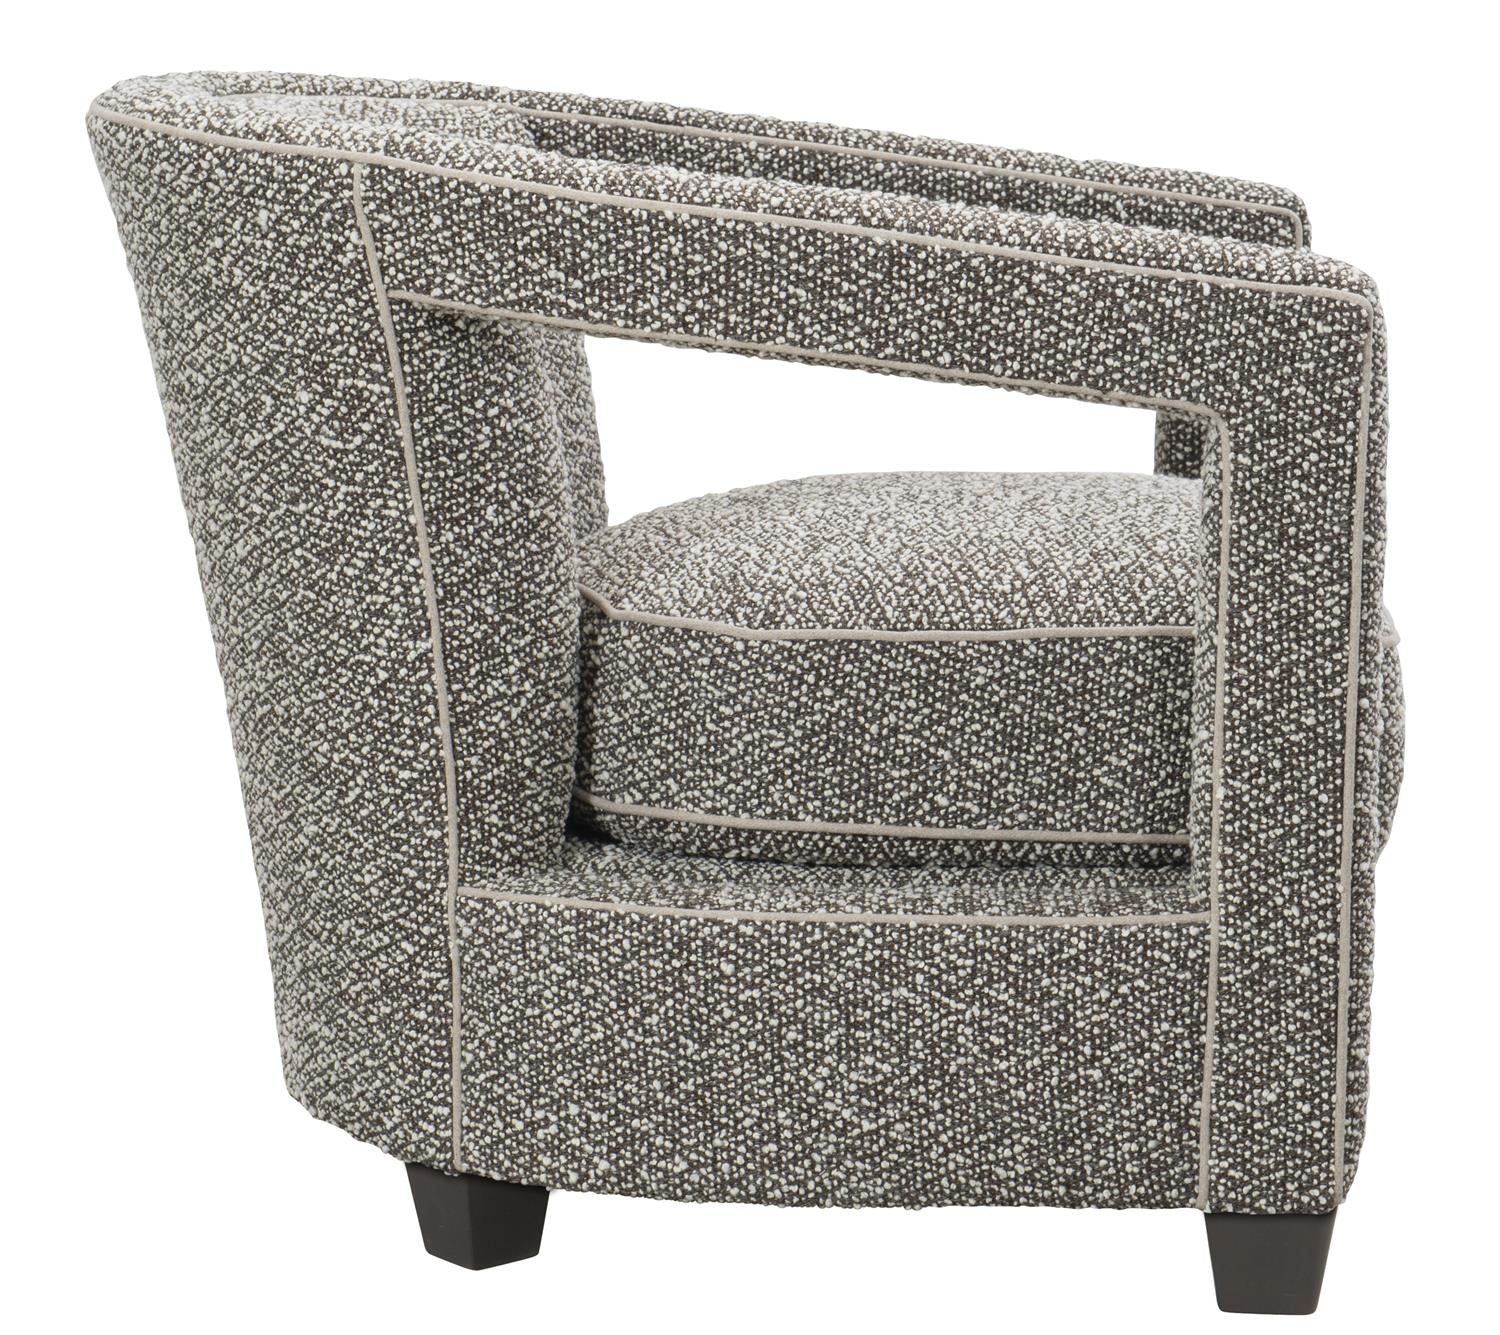 Bernhardt, Alana Fabric Chair Without Nails